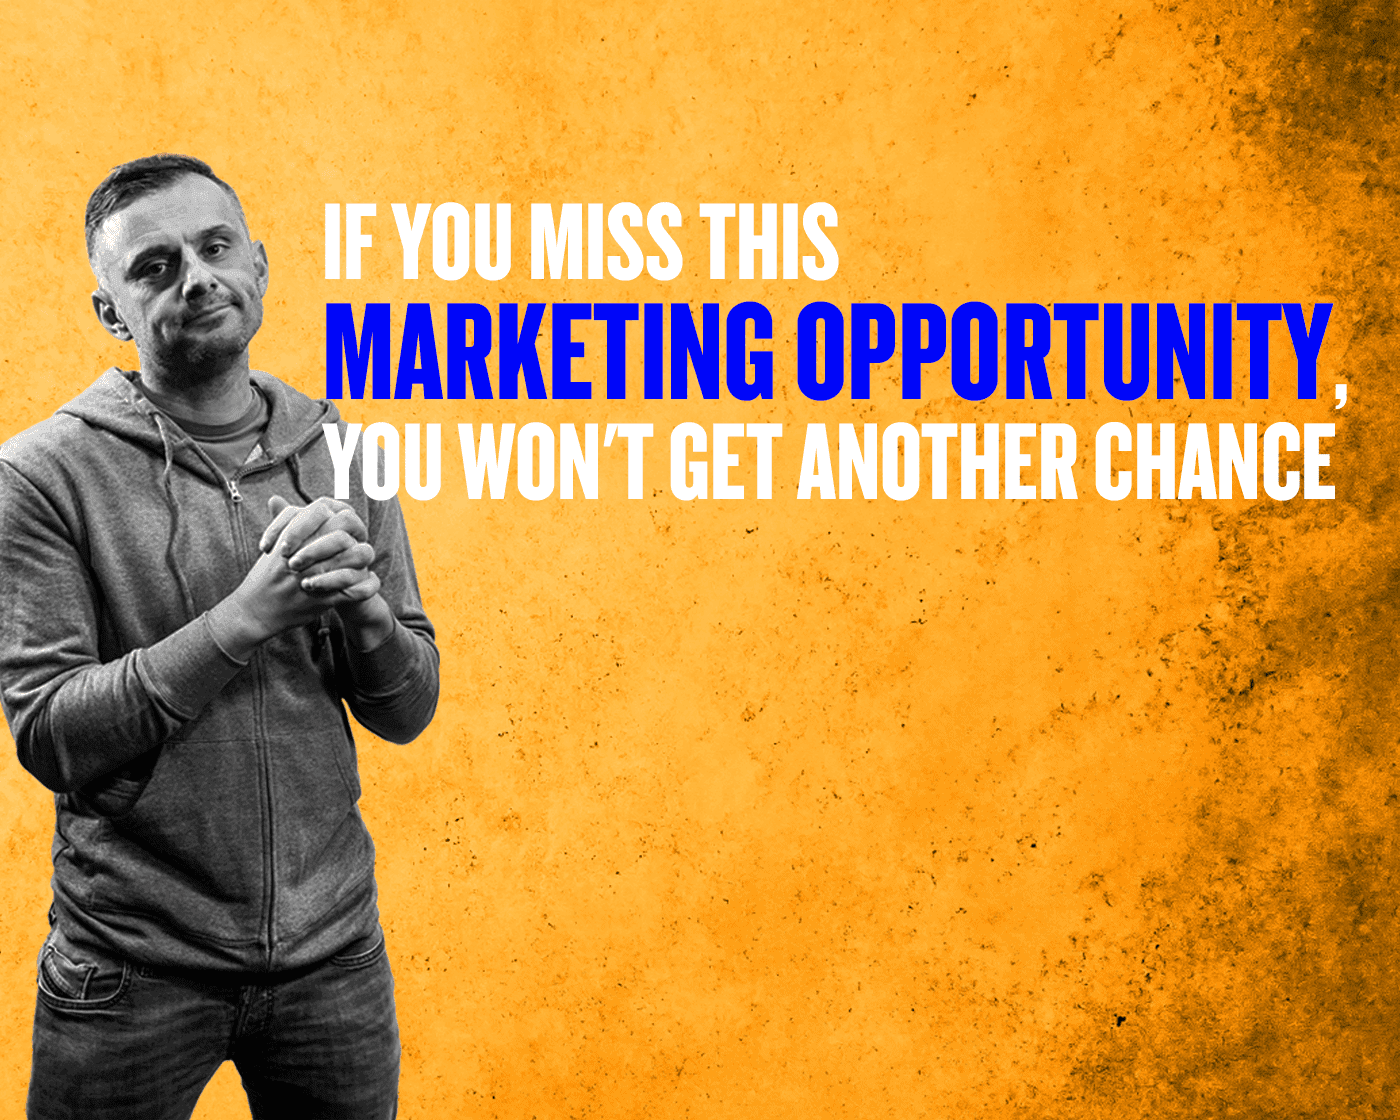 3 Marketing Opportunities to Take Advantage of in 2019